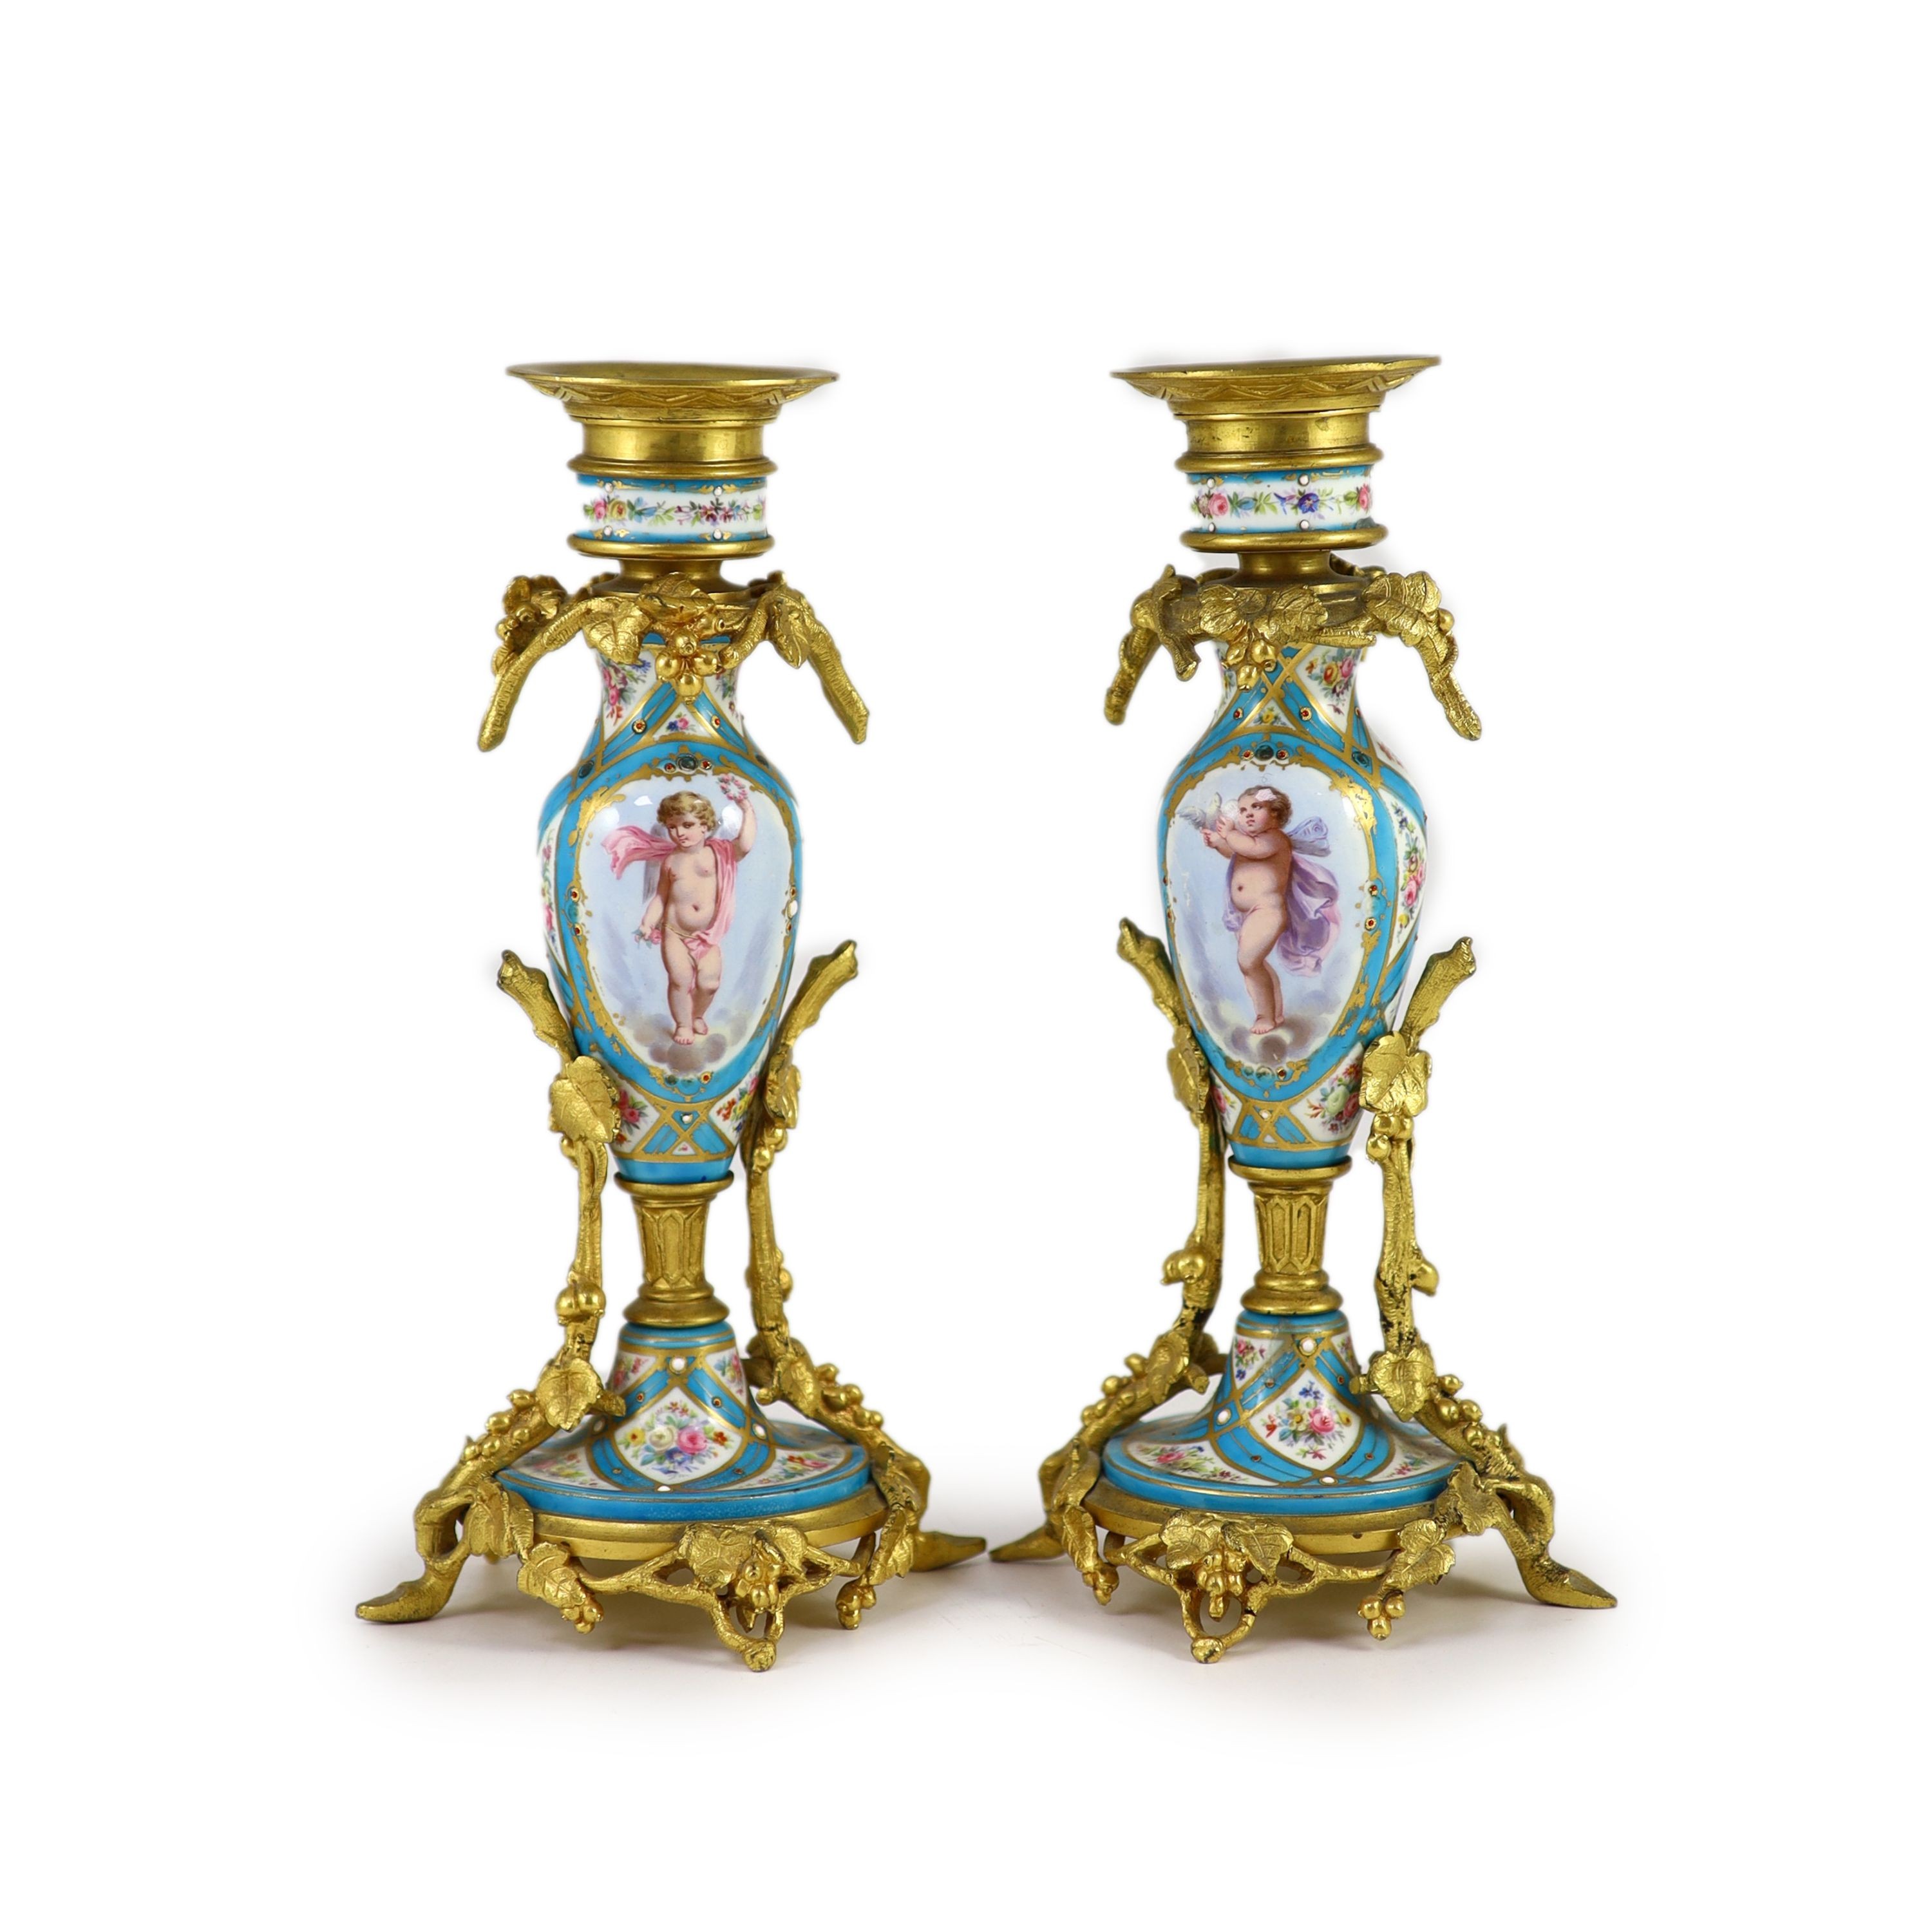 A pair of 19th century ormolu mounted Sevres style jewelled porcelain candlesticks,decorated with